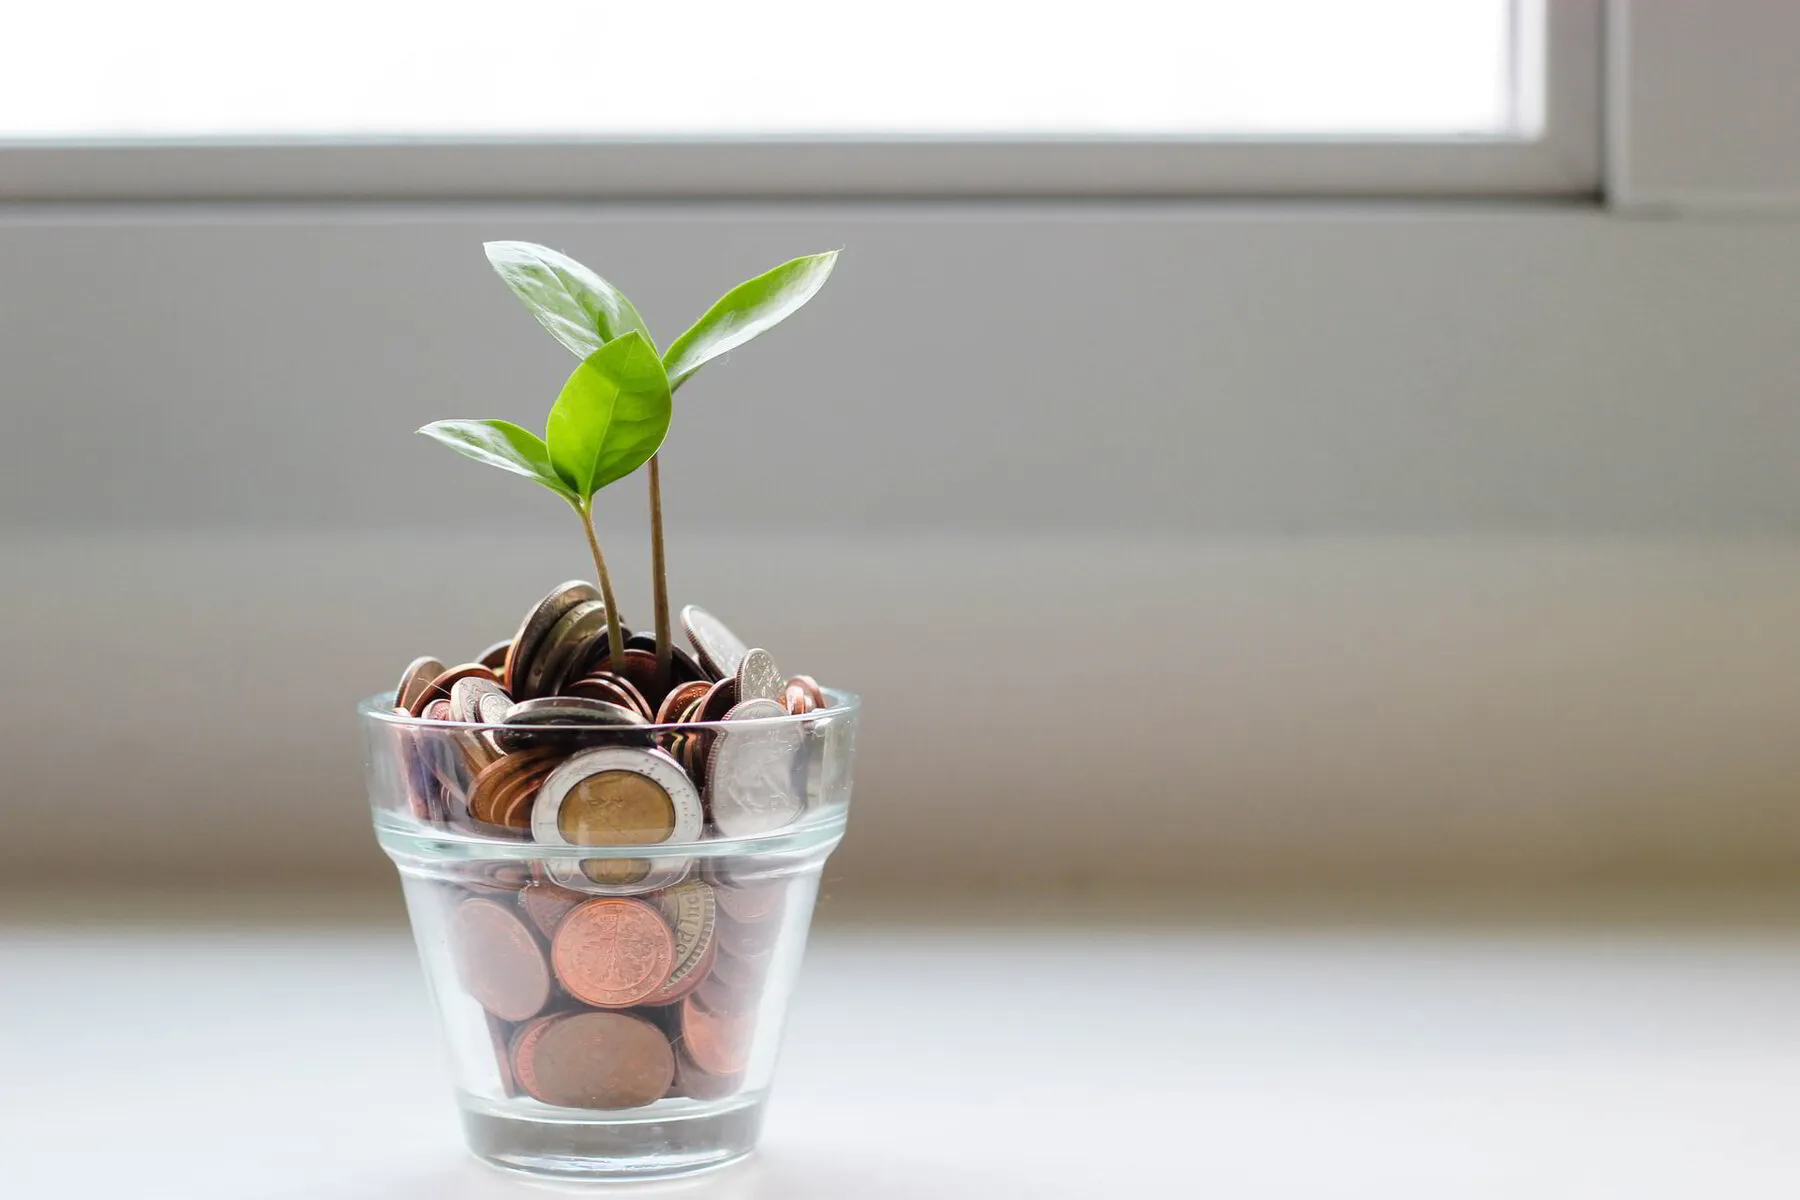 Plant growing out of a coin jar